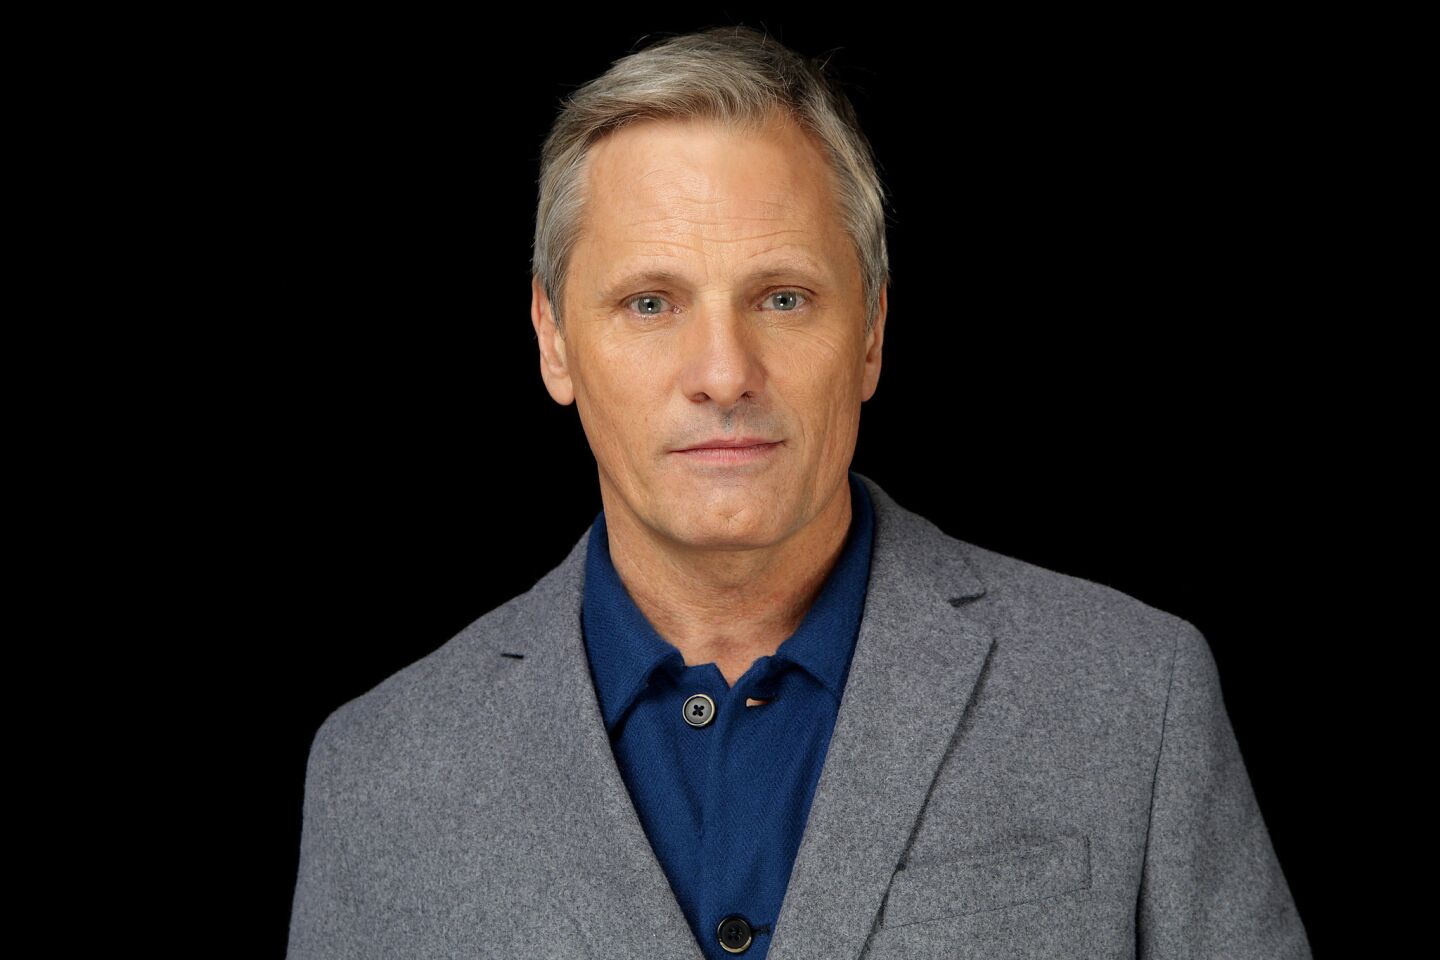 Viggo Mortensen has two previous nominations in this category, most recently two years ago for “Captain Fantastic.” His role as bouncer-turned-chauffeur Tony Lip has already earned him Golden Globe, BAFTA and SAG award nominations.